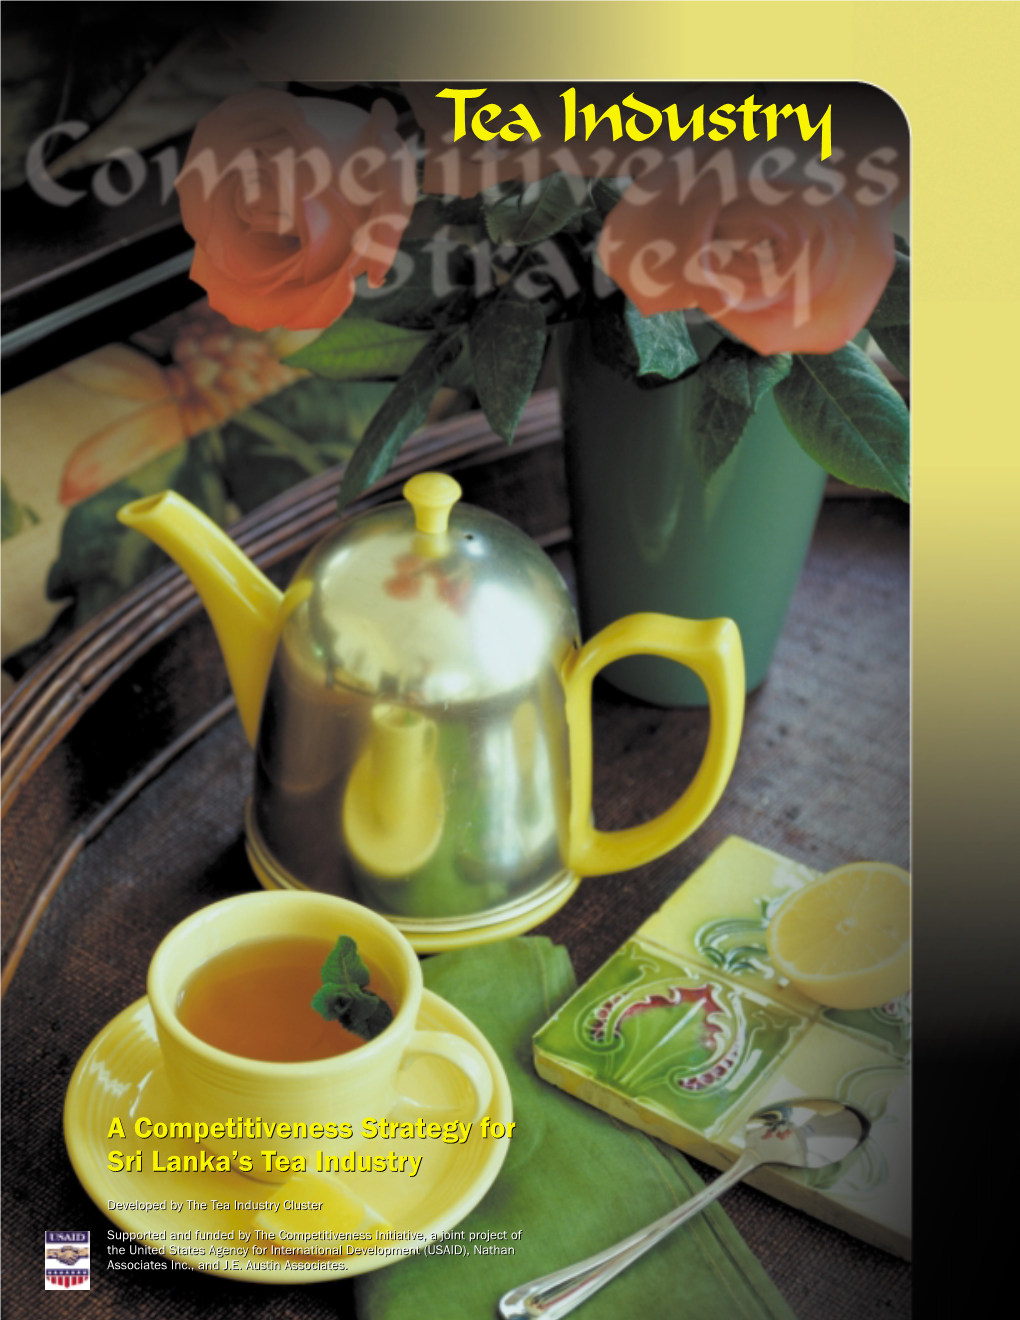 A Competitiveness Strategy for Sri Lanka's Tea Industry